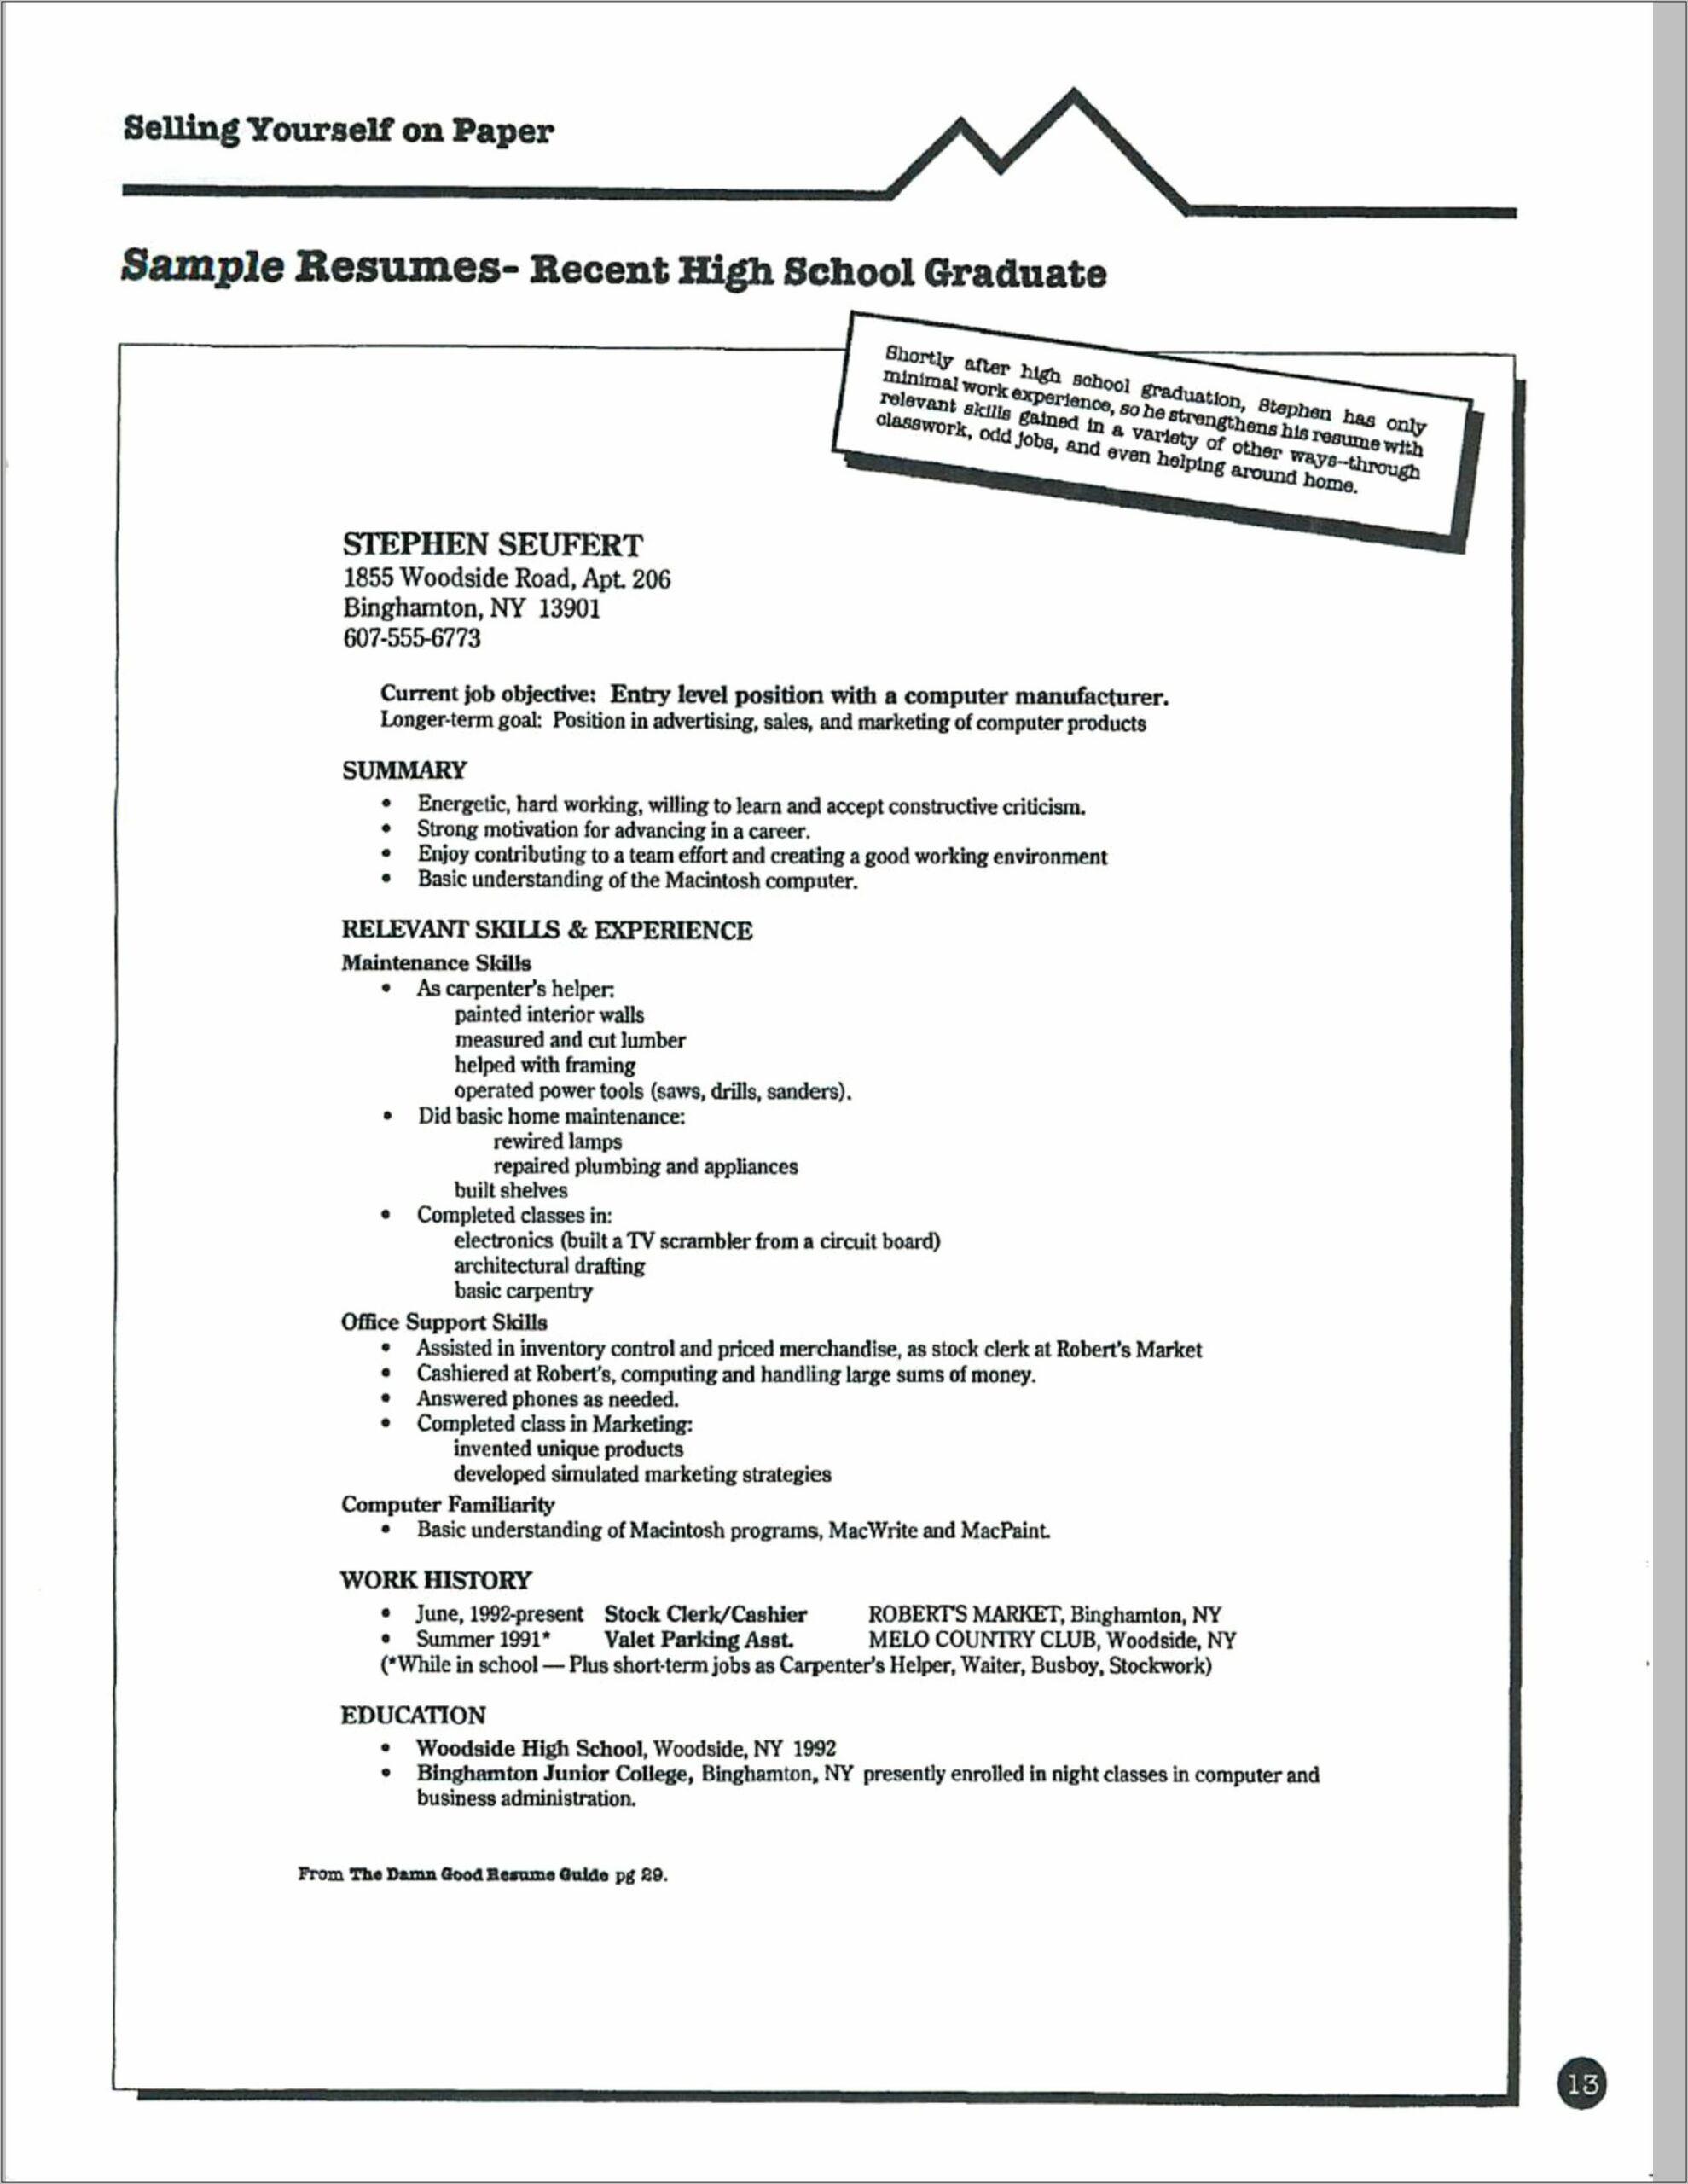 Examples Of Good Resumes For Recent College Graduates